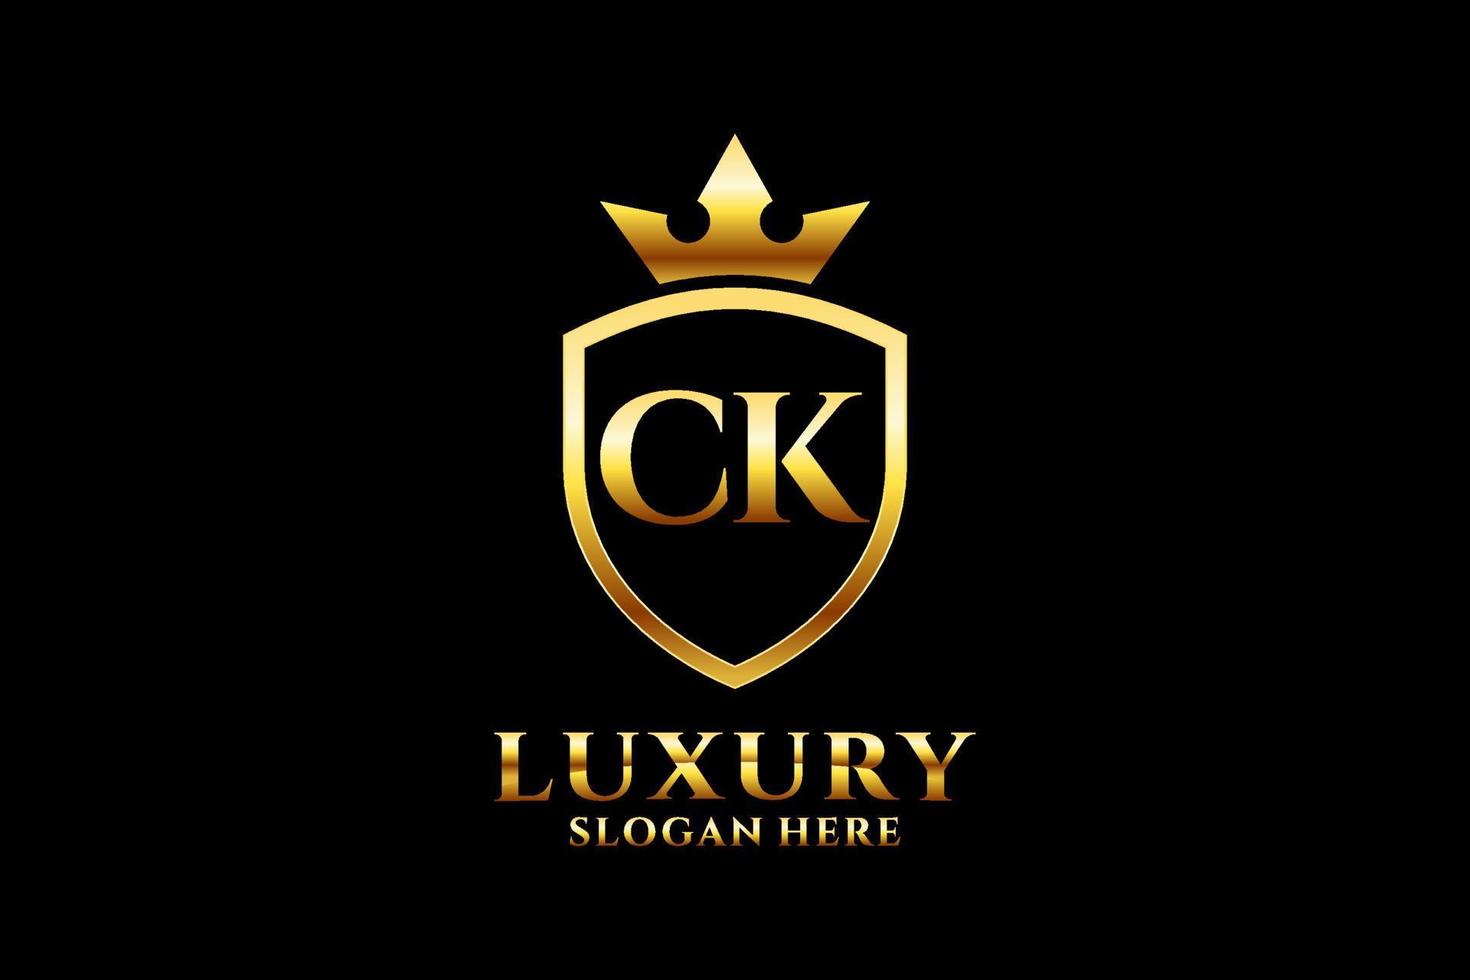 initial CK elegant luxury monogram logo or badge template with scrolls and royal crown - perfect for luxurious branding projects vector